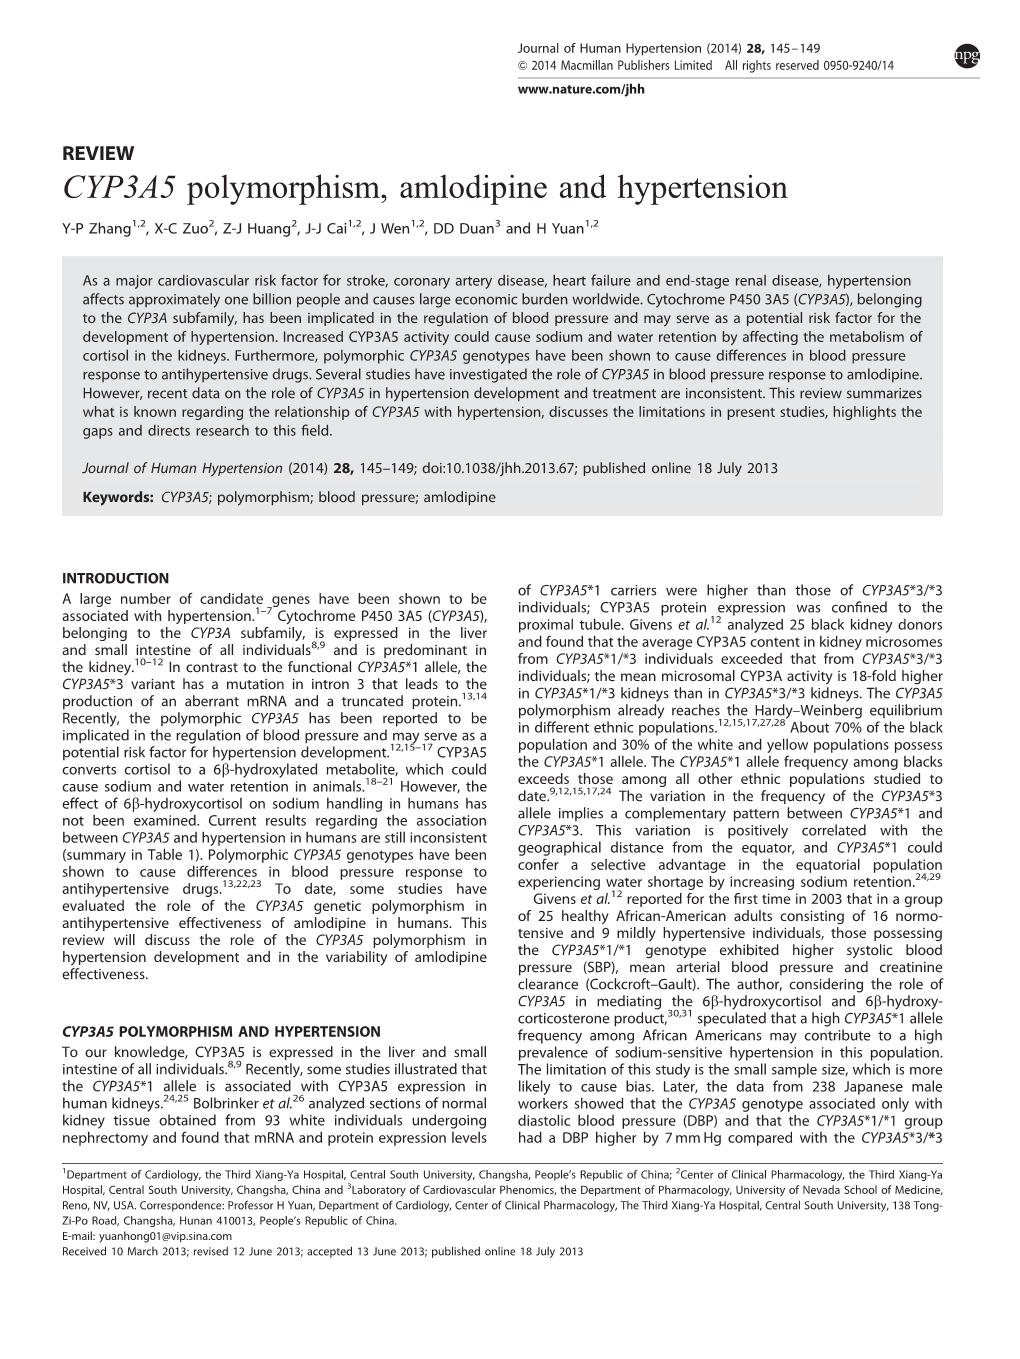 CYP3A5 Polymorphism, Amlodipine and Hypertension